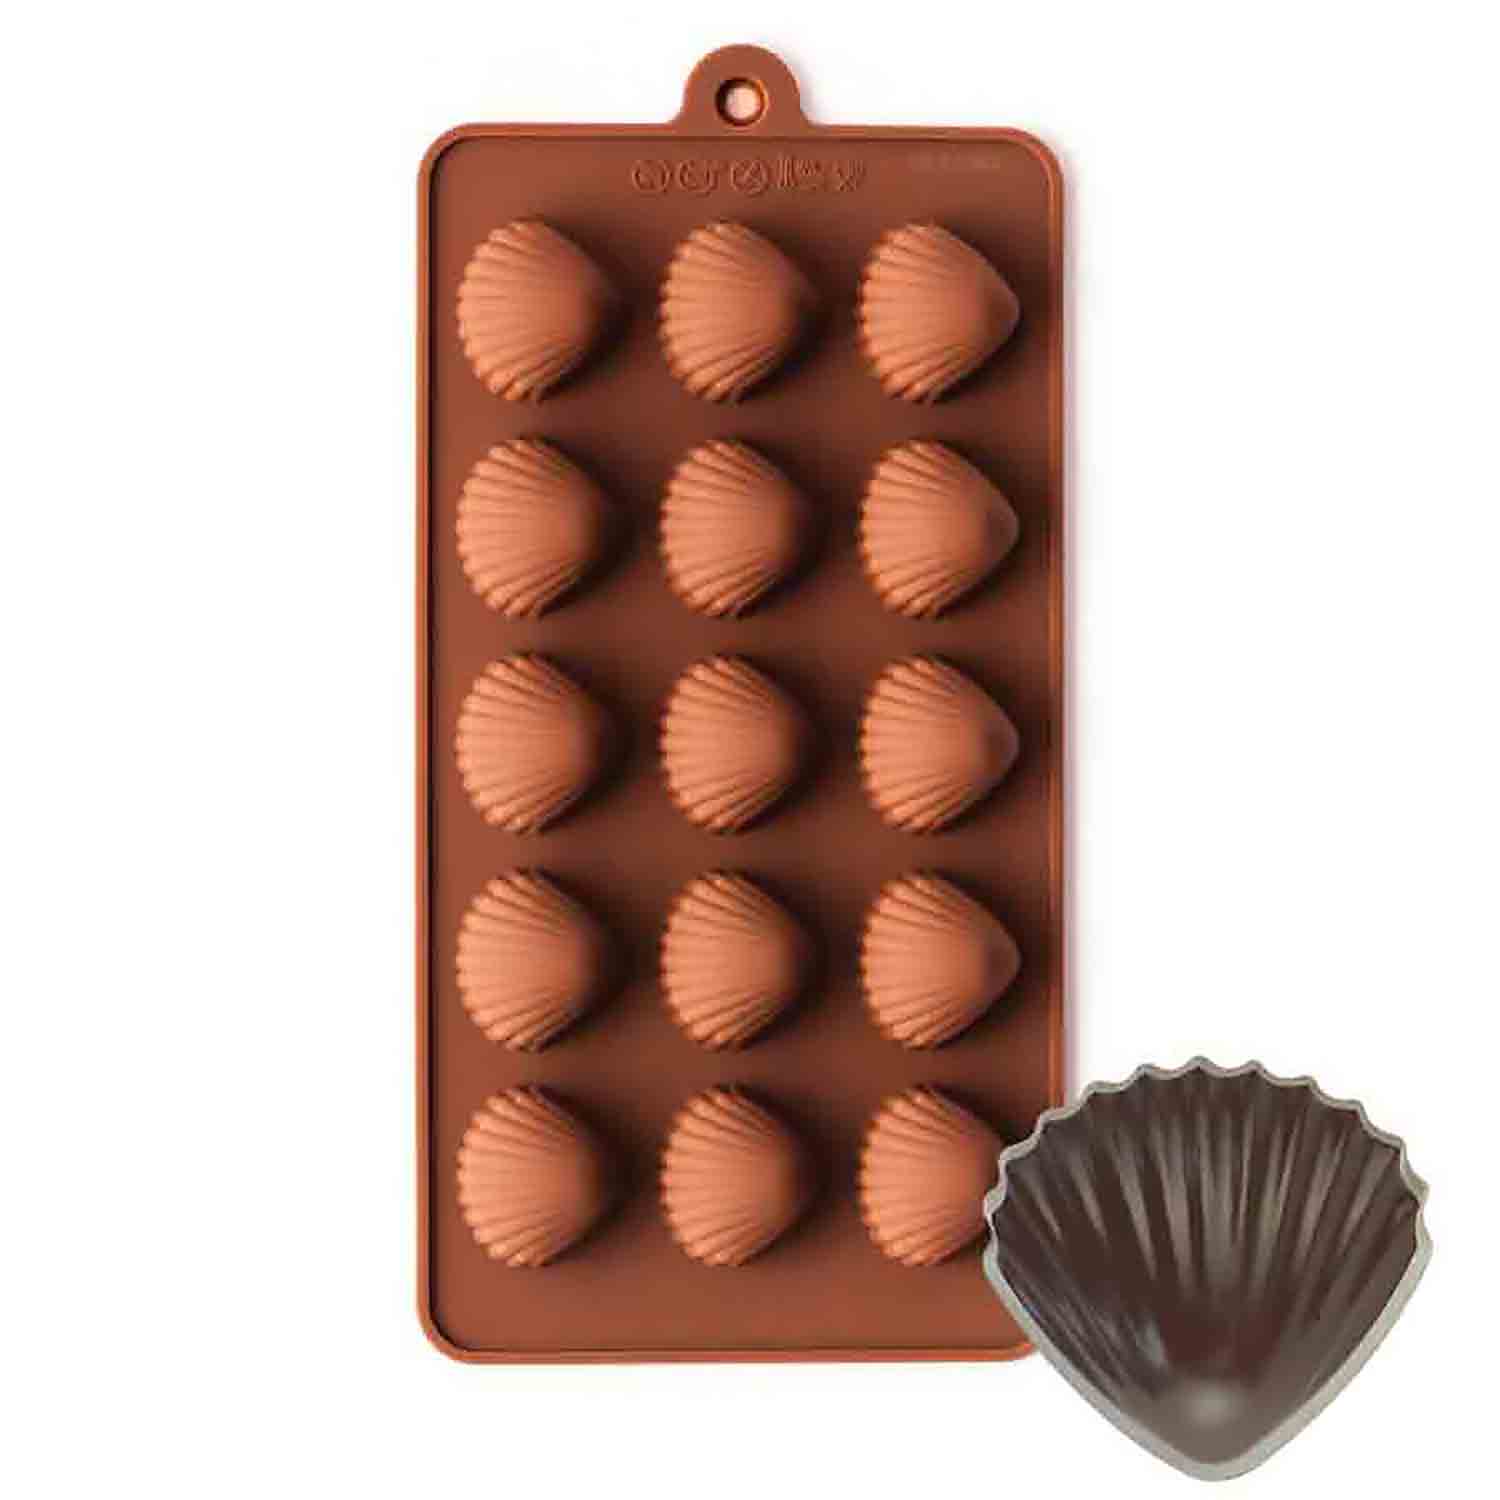 Bubble Chocolate Bar Mold For Chocolates Bonbons Mold Candy Cake Fondant  Baking Pastry Tools